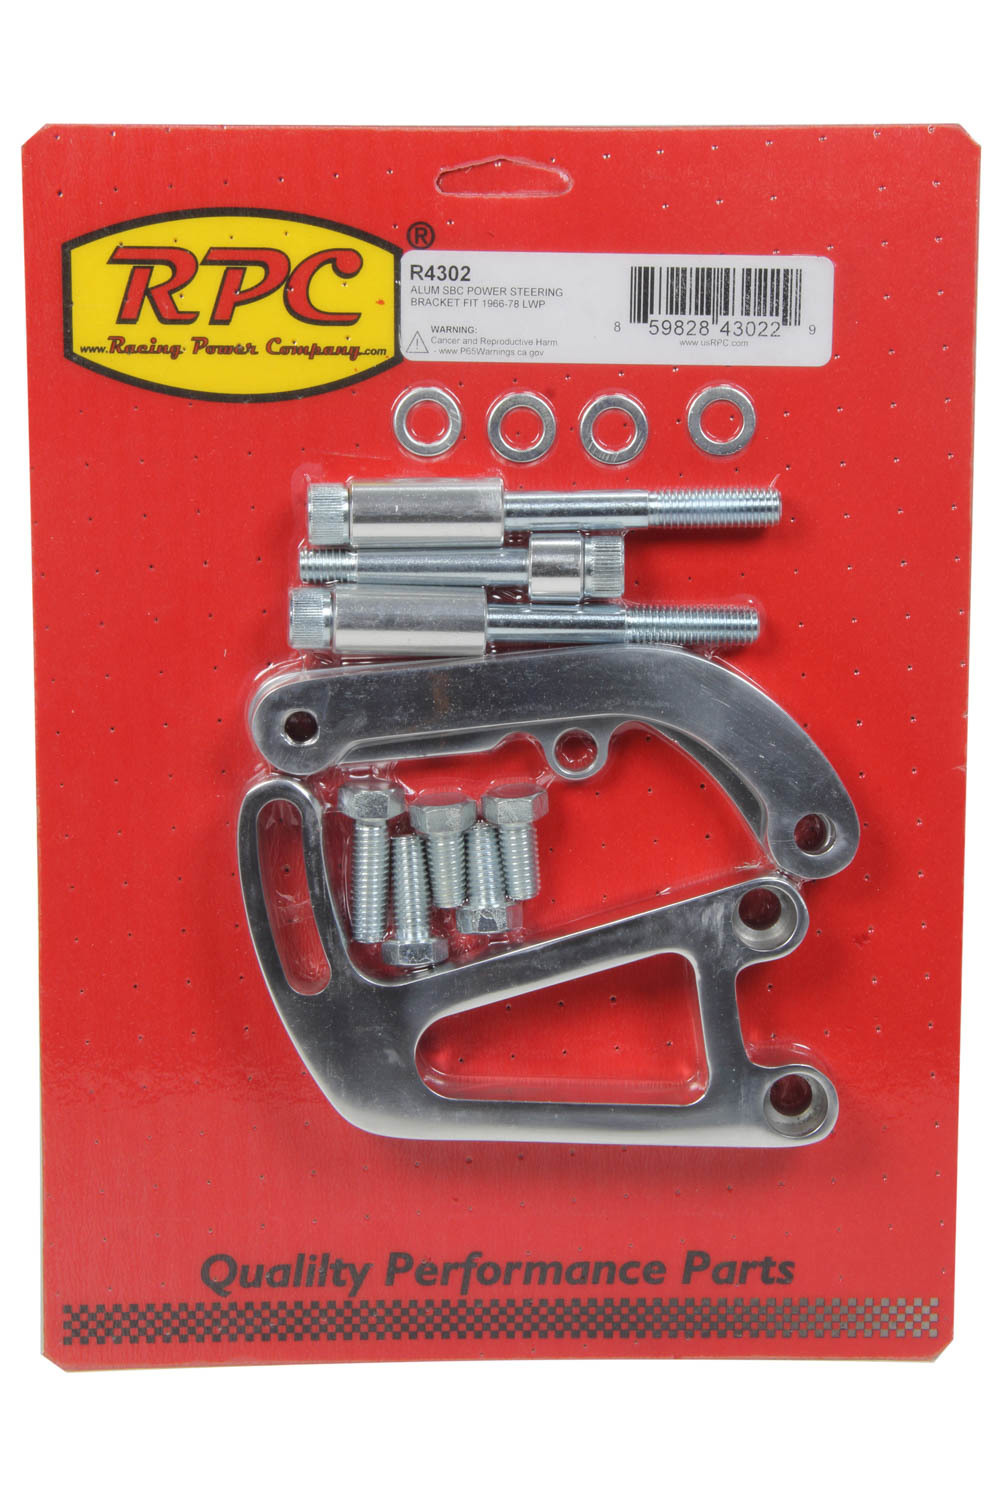 Racing Power Company R4302 Power Steering Pump Bracket, Driver Side, Block Mount, Aluminum, Polished, Long Water Pump, Small Block Chevy, Kit